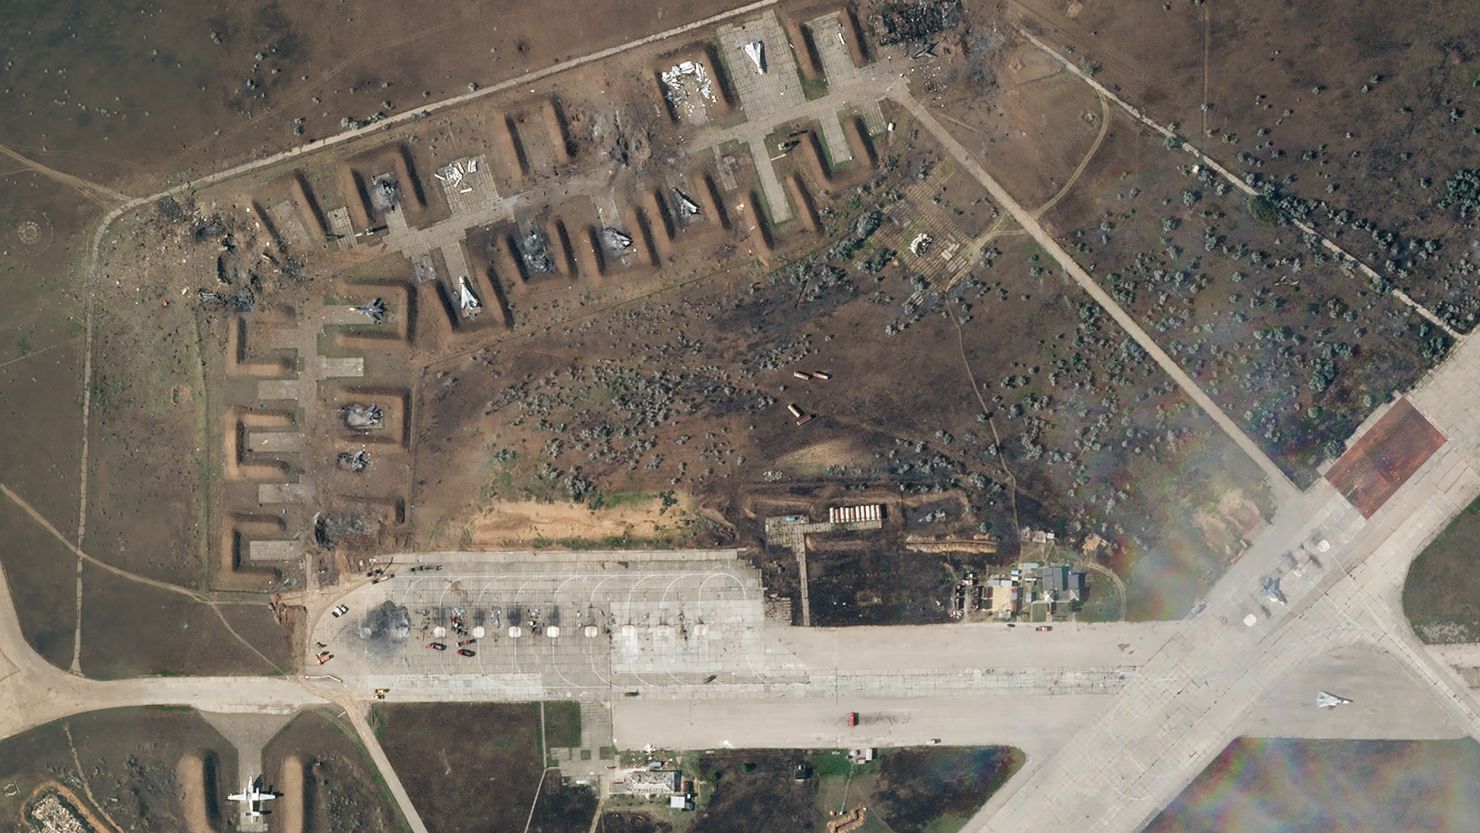 A satellite image from August 10, after the explosion, shows the charred remains of at least seven aircraft in the earthen berms.  